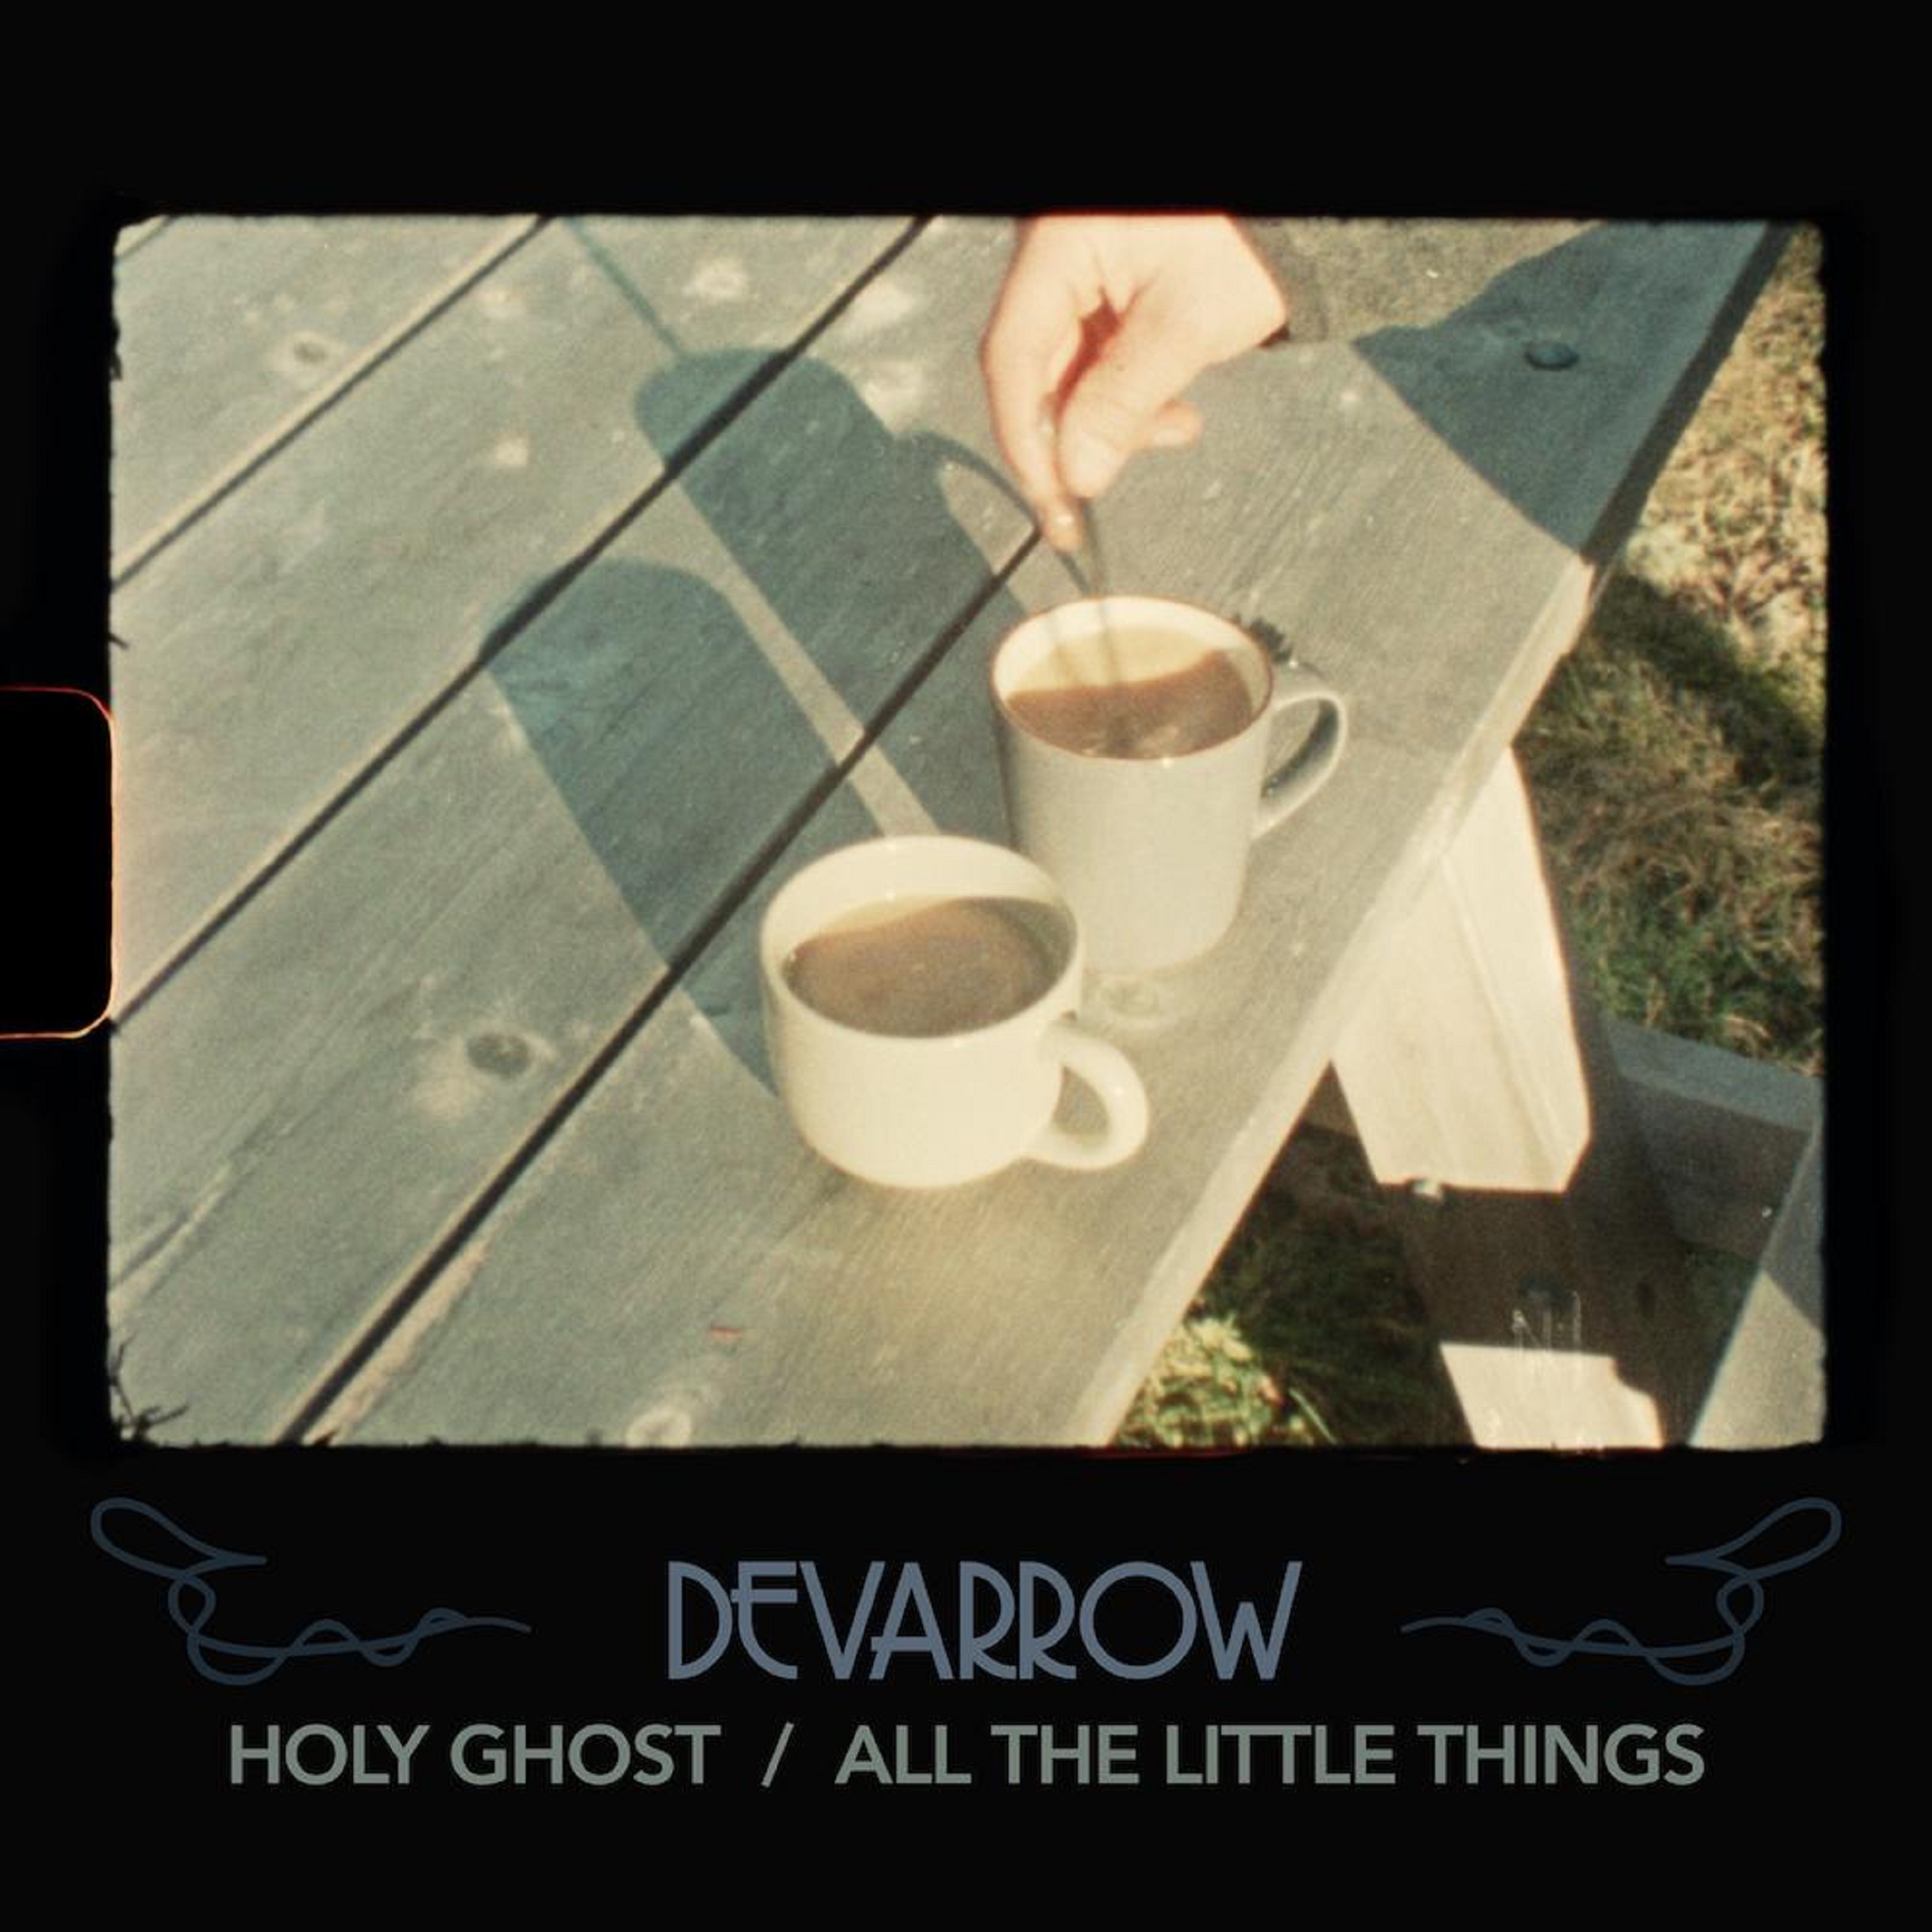 DEVARROW DELIVERS A DOUBLE DOSE OF POP-INFUSED FOLK TREATS